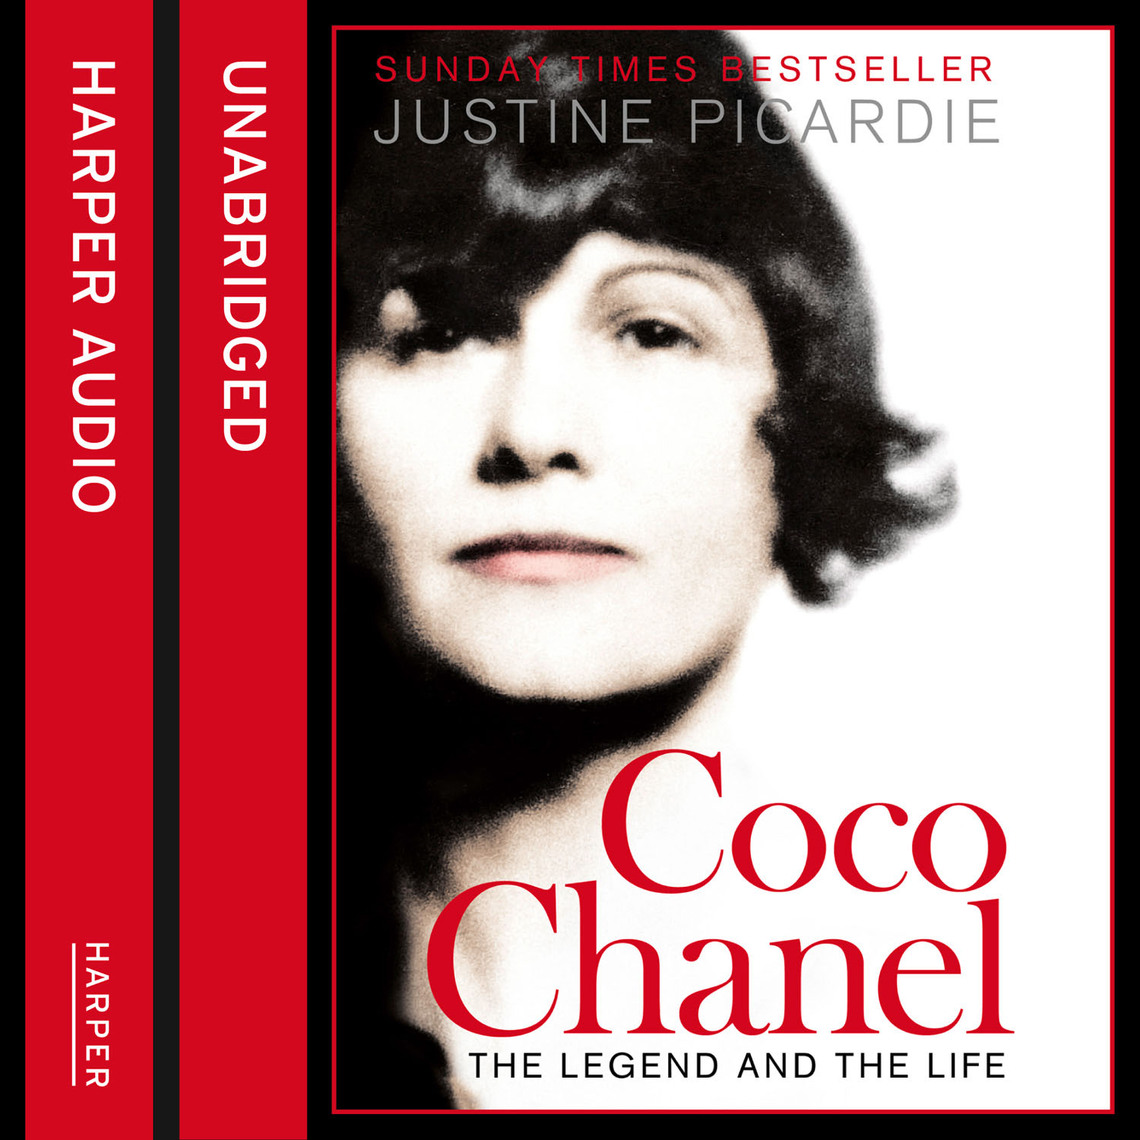 Coco Chanel: The Legend and the Life: unknown author